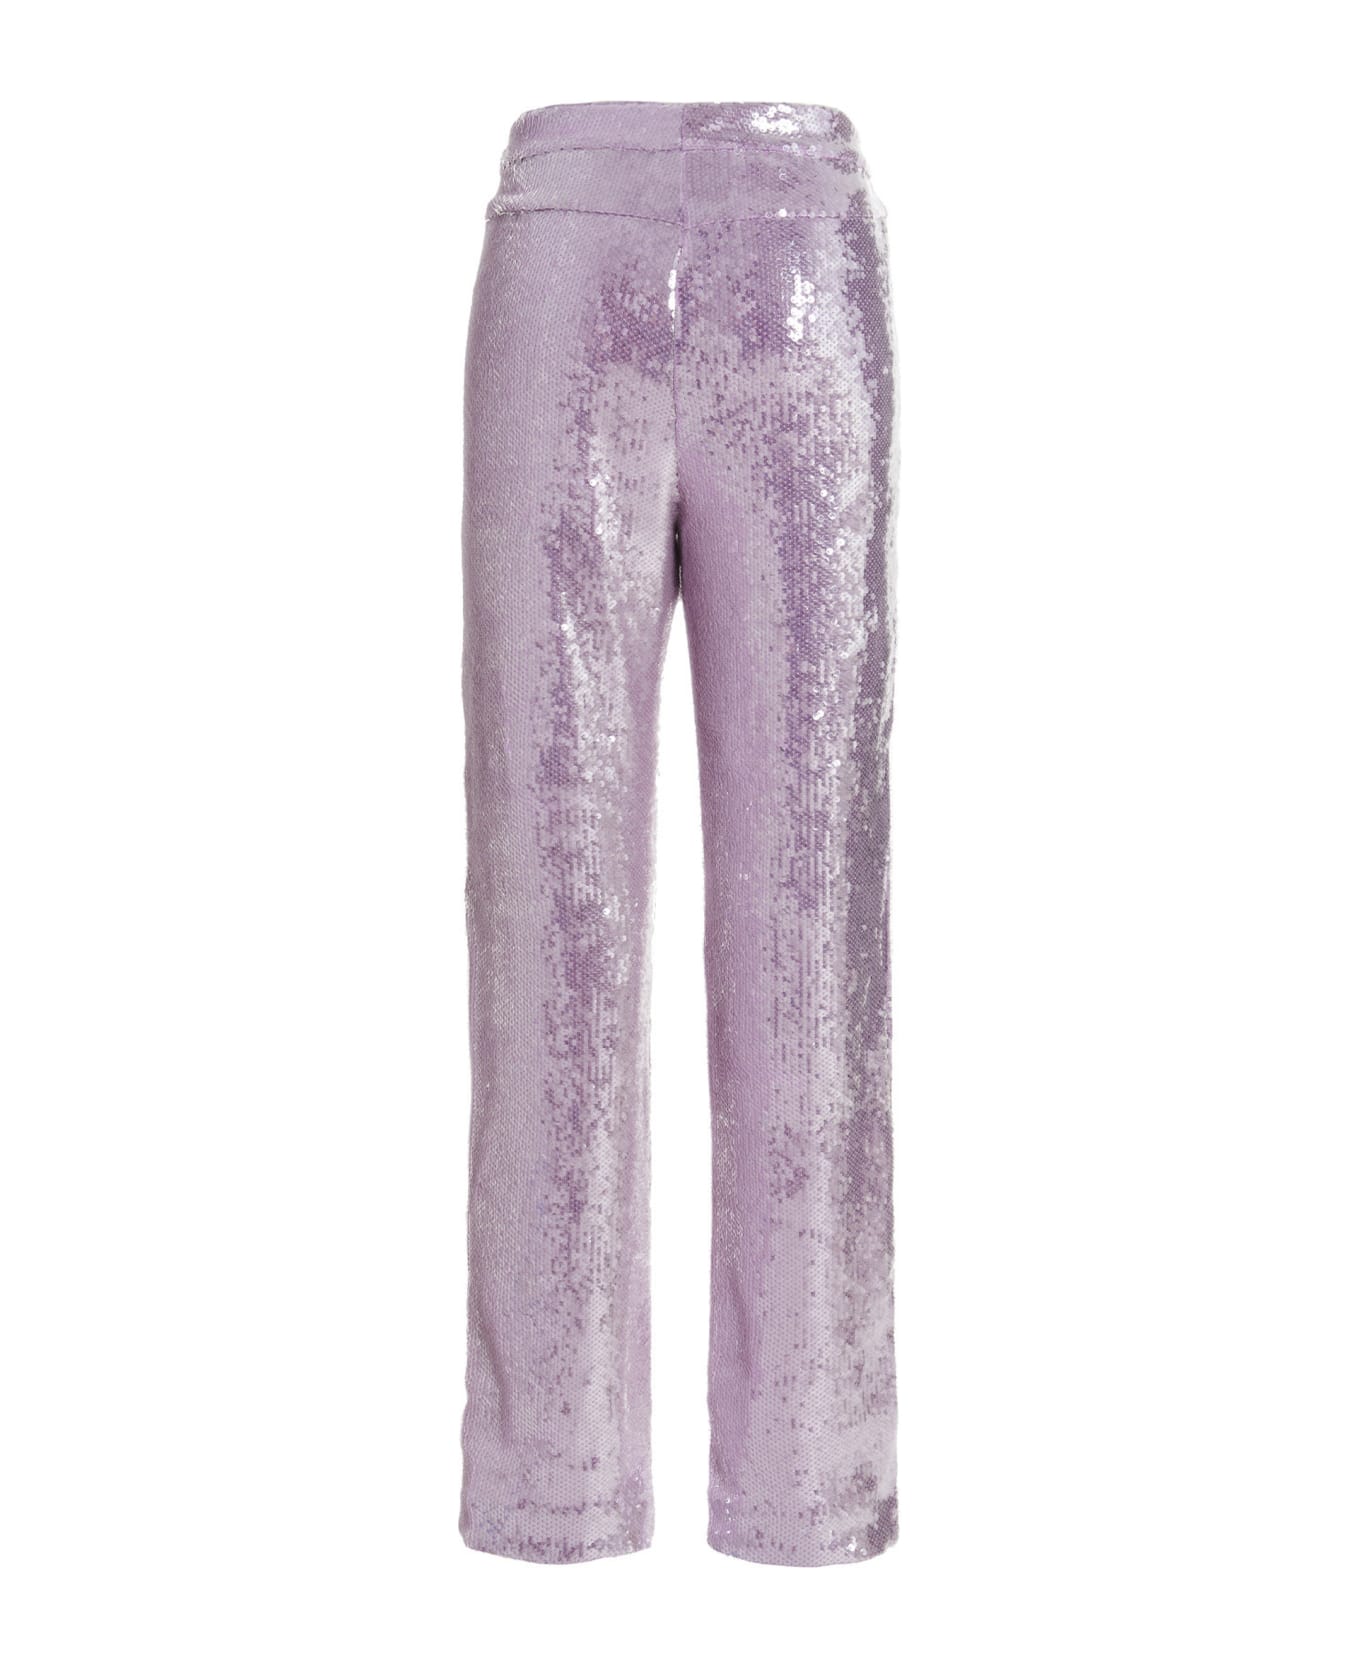 Rotate by Birger Christensen Sequin Pants - Lupine